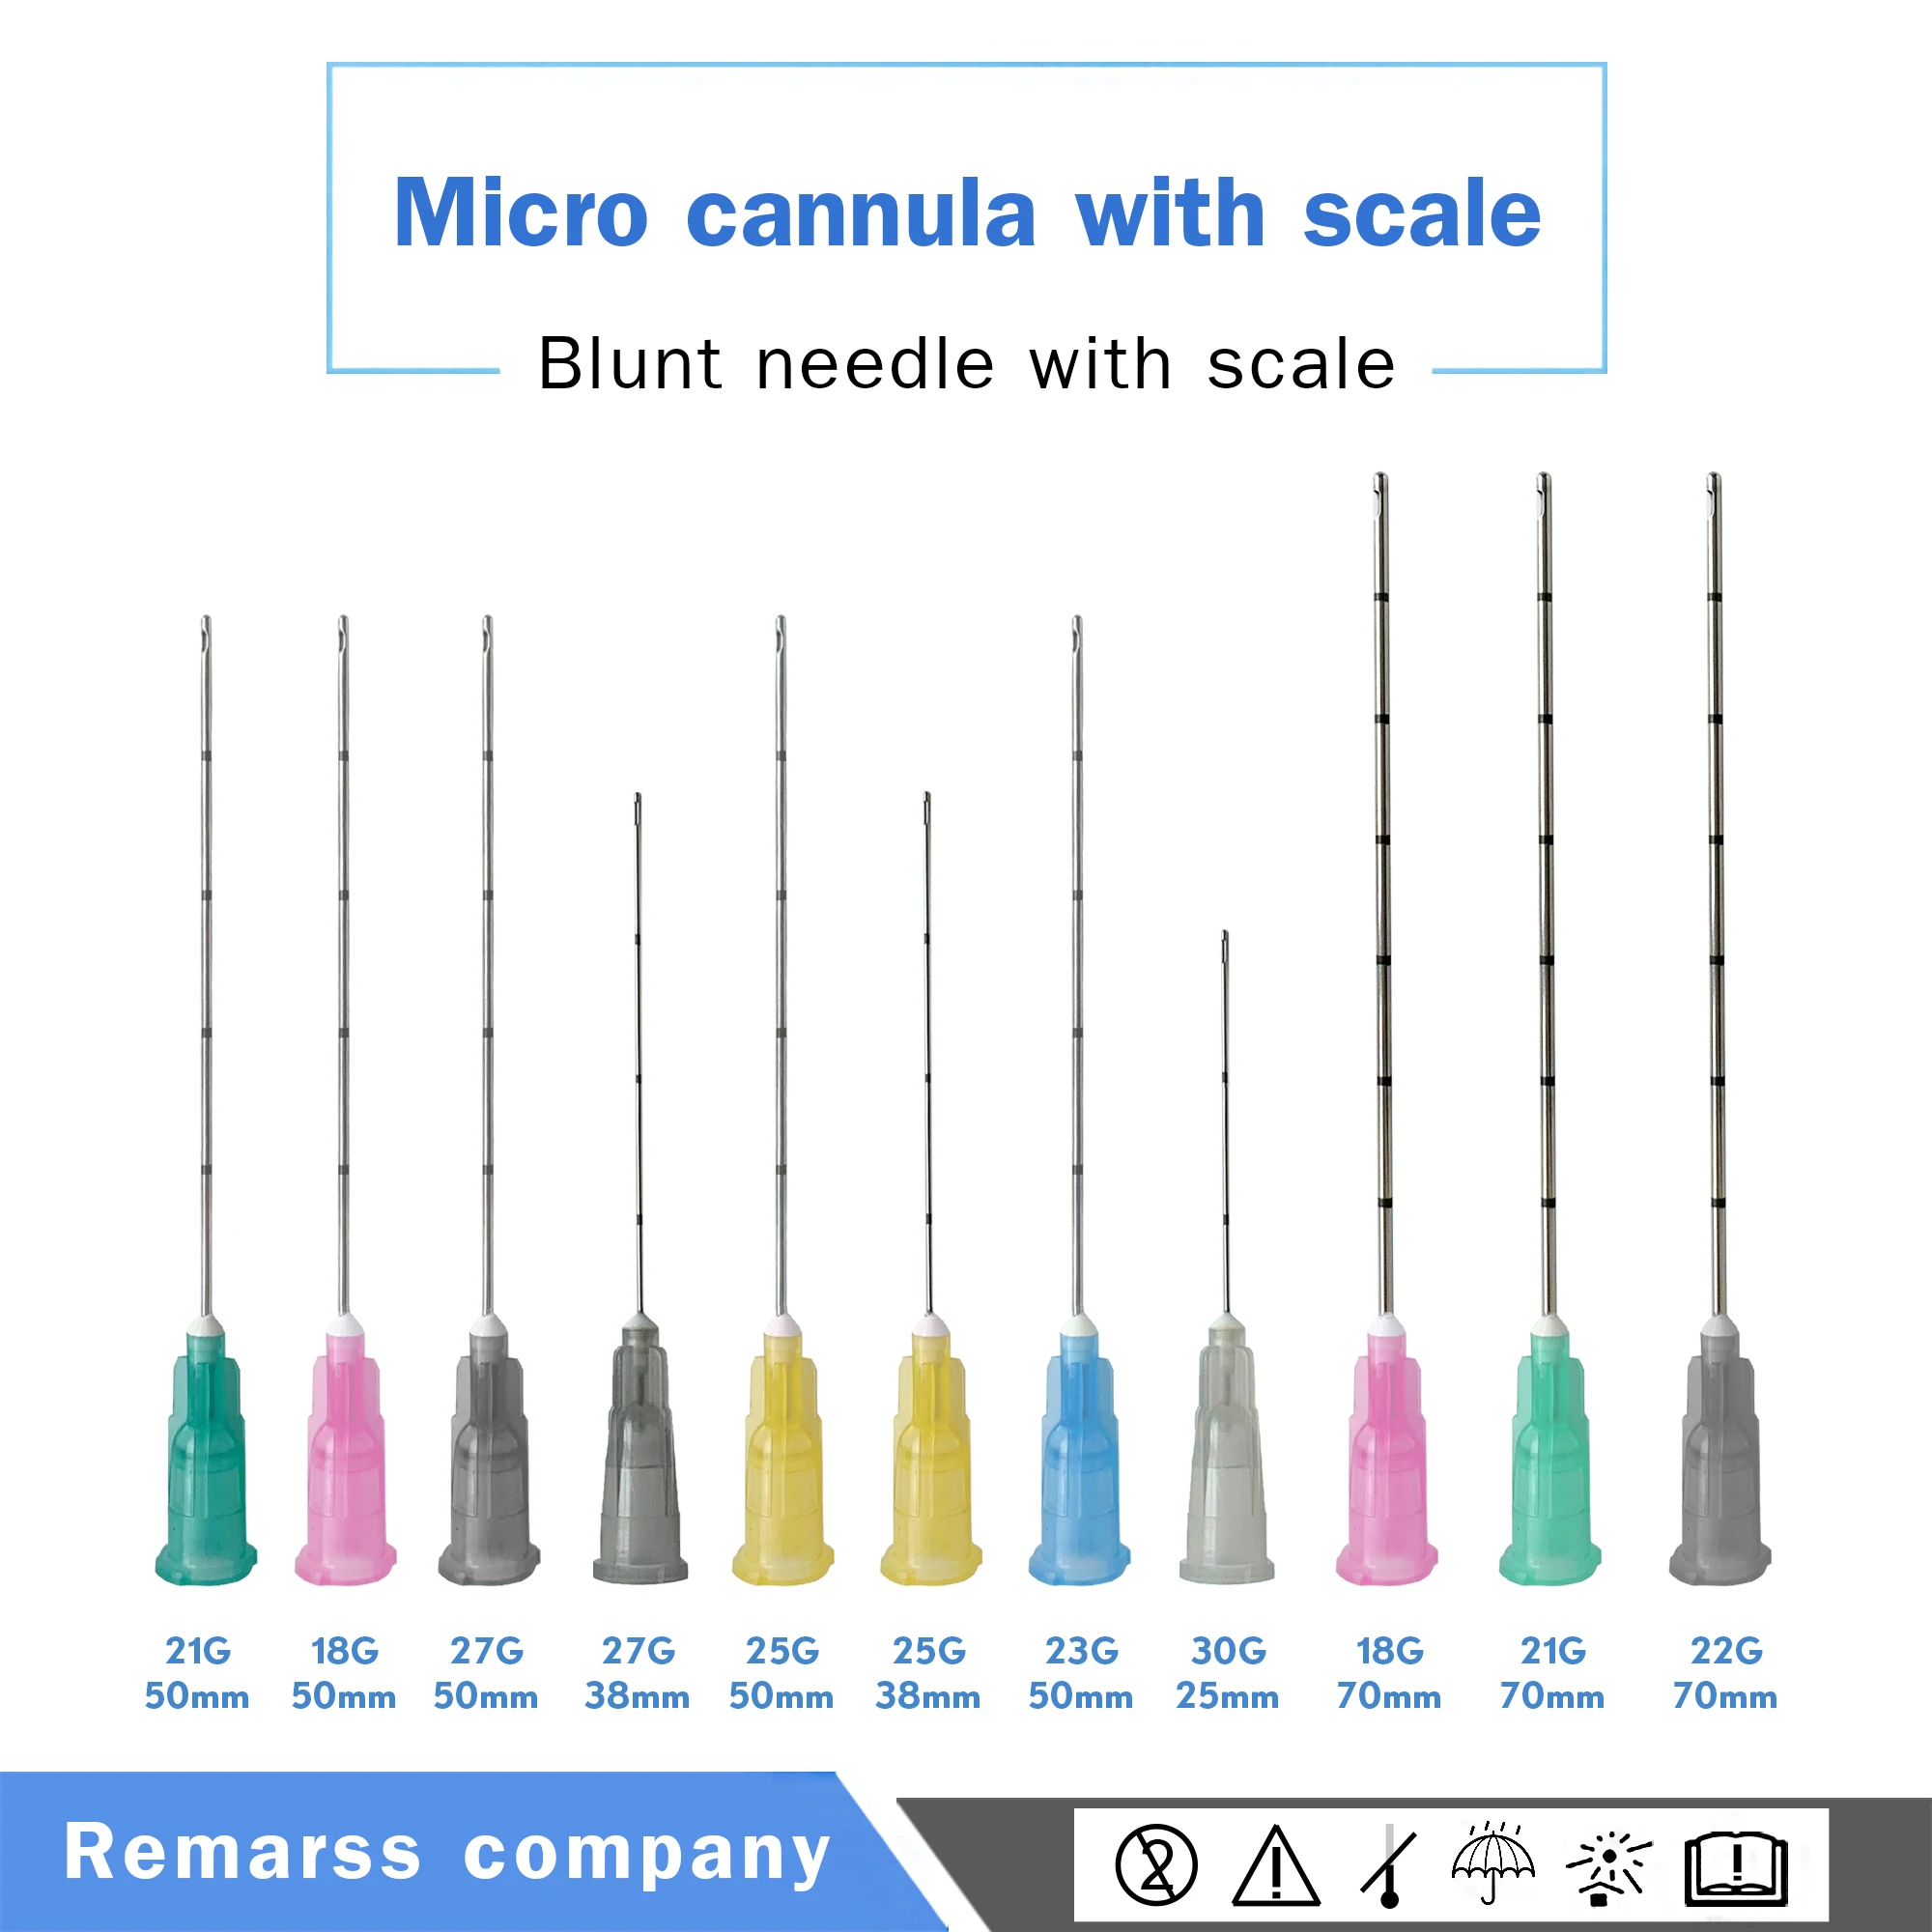 

New Disposable Free shipping Micro Cannula Injection Needle 30G25mm 27G38mm 25G38mm/50mm For Comissural Dermal Filler Injection